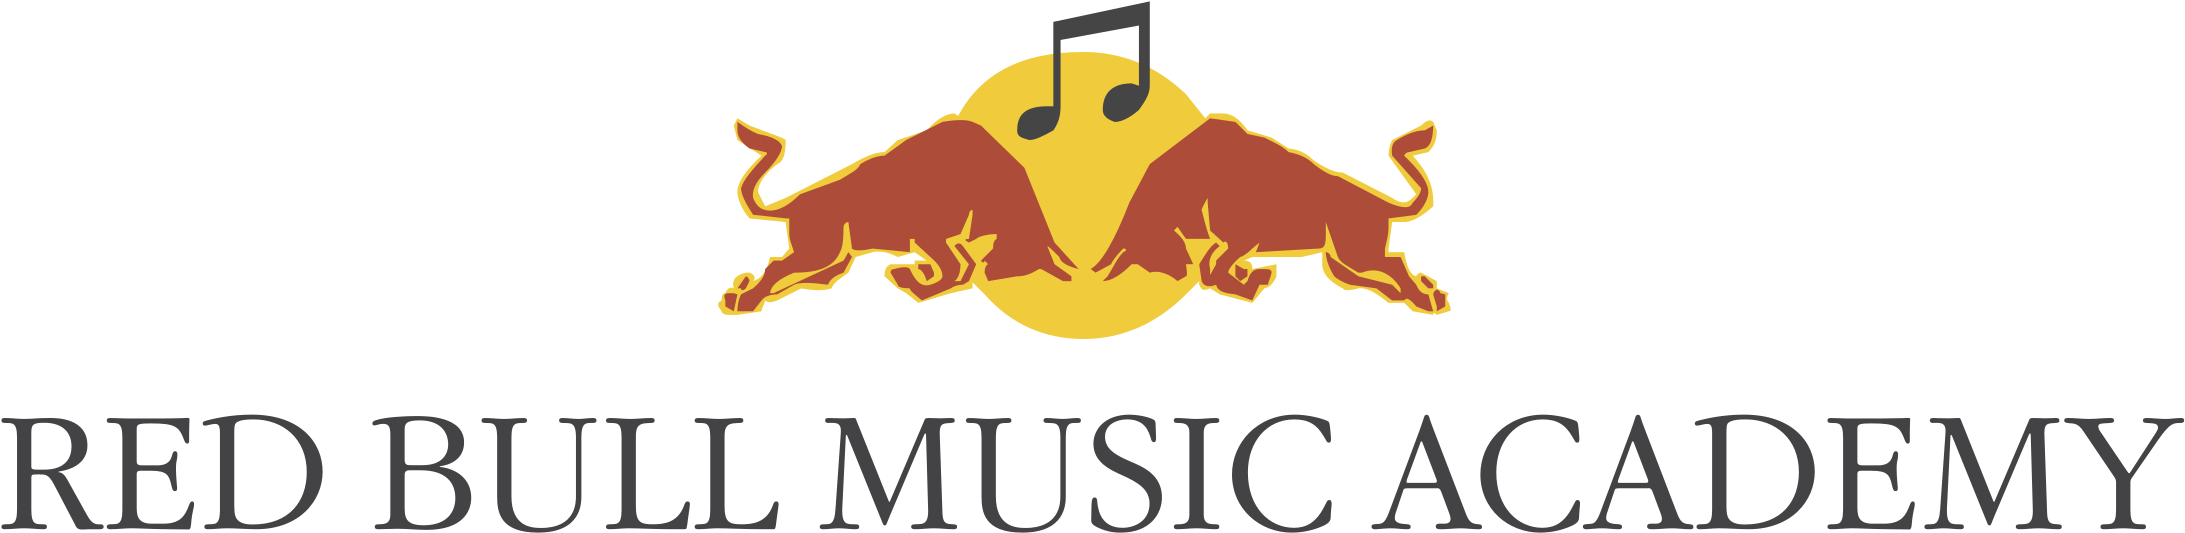 Red Bull Music Academy Logo Png Transparent - Red Bull (2400x2400), Png Download